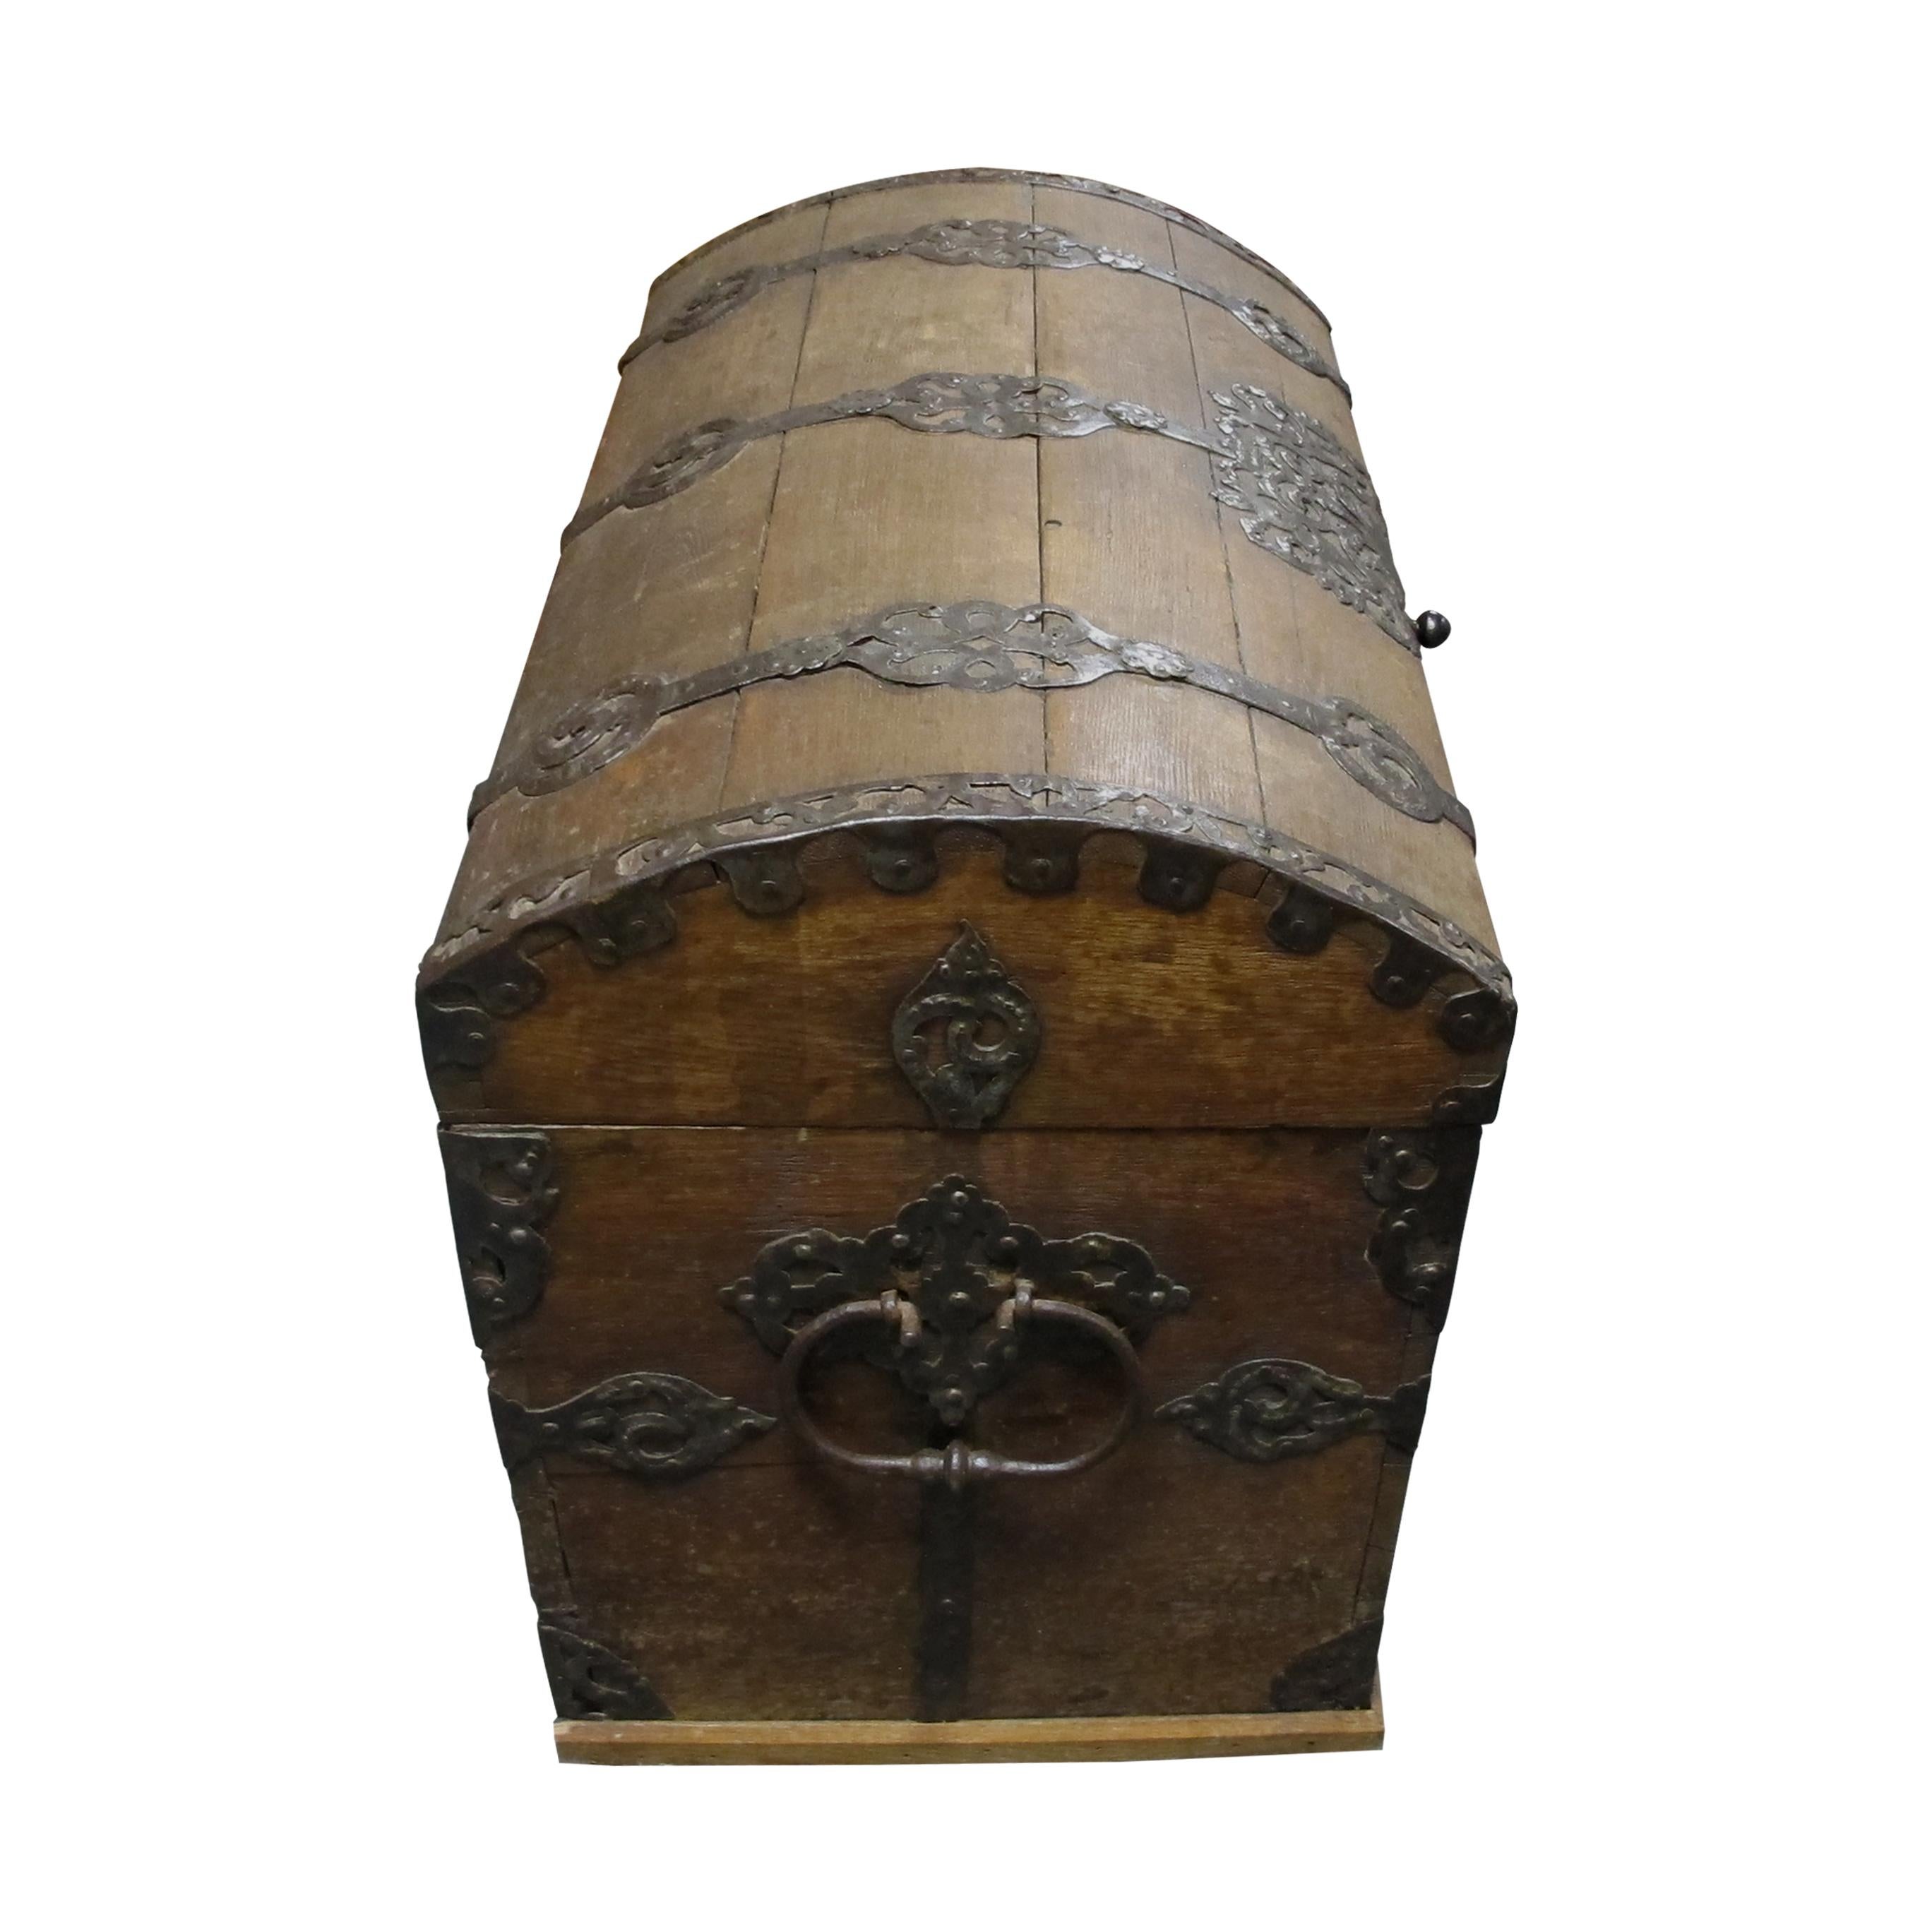 Magnificent Baroque trunk-coffer made of solid oak with a dome curved lid top which is decorated with iron ribbons ands and foliage. The original key and the lock mechanism are in perfect working condition. Each side of the trunk is fitted with iron